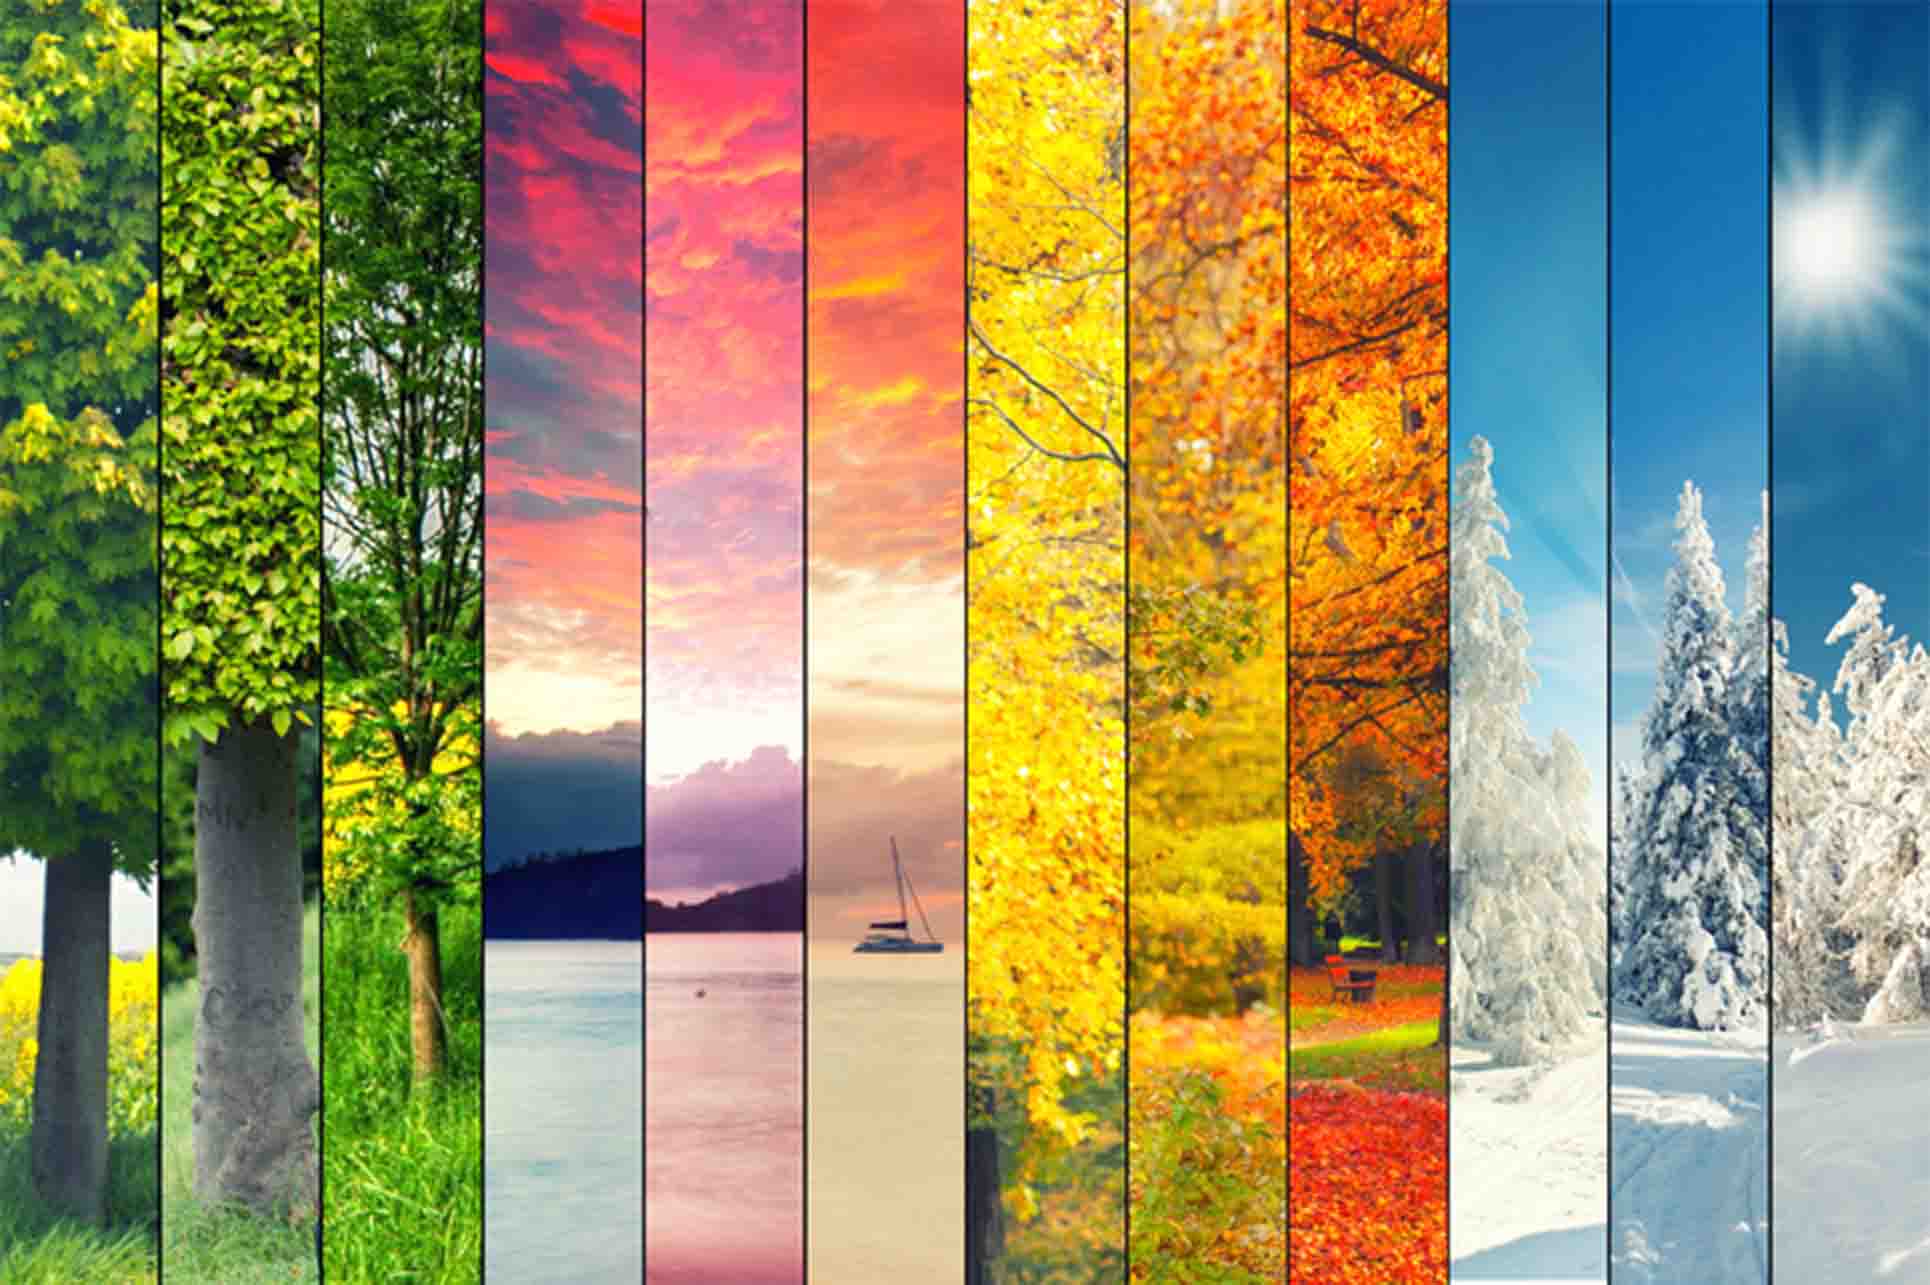 Are There More Than Four Seasons?